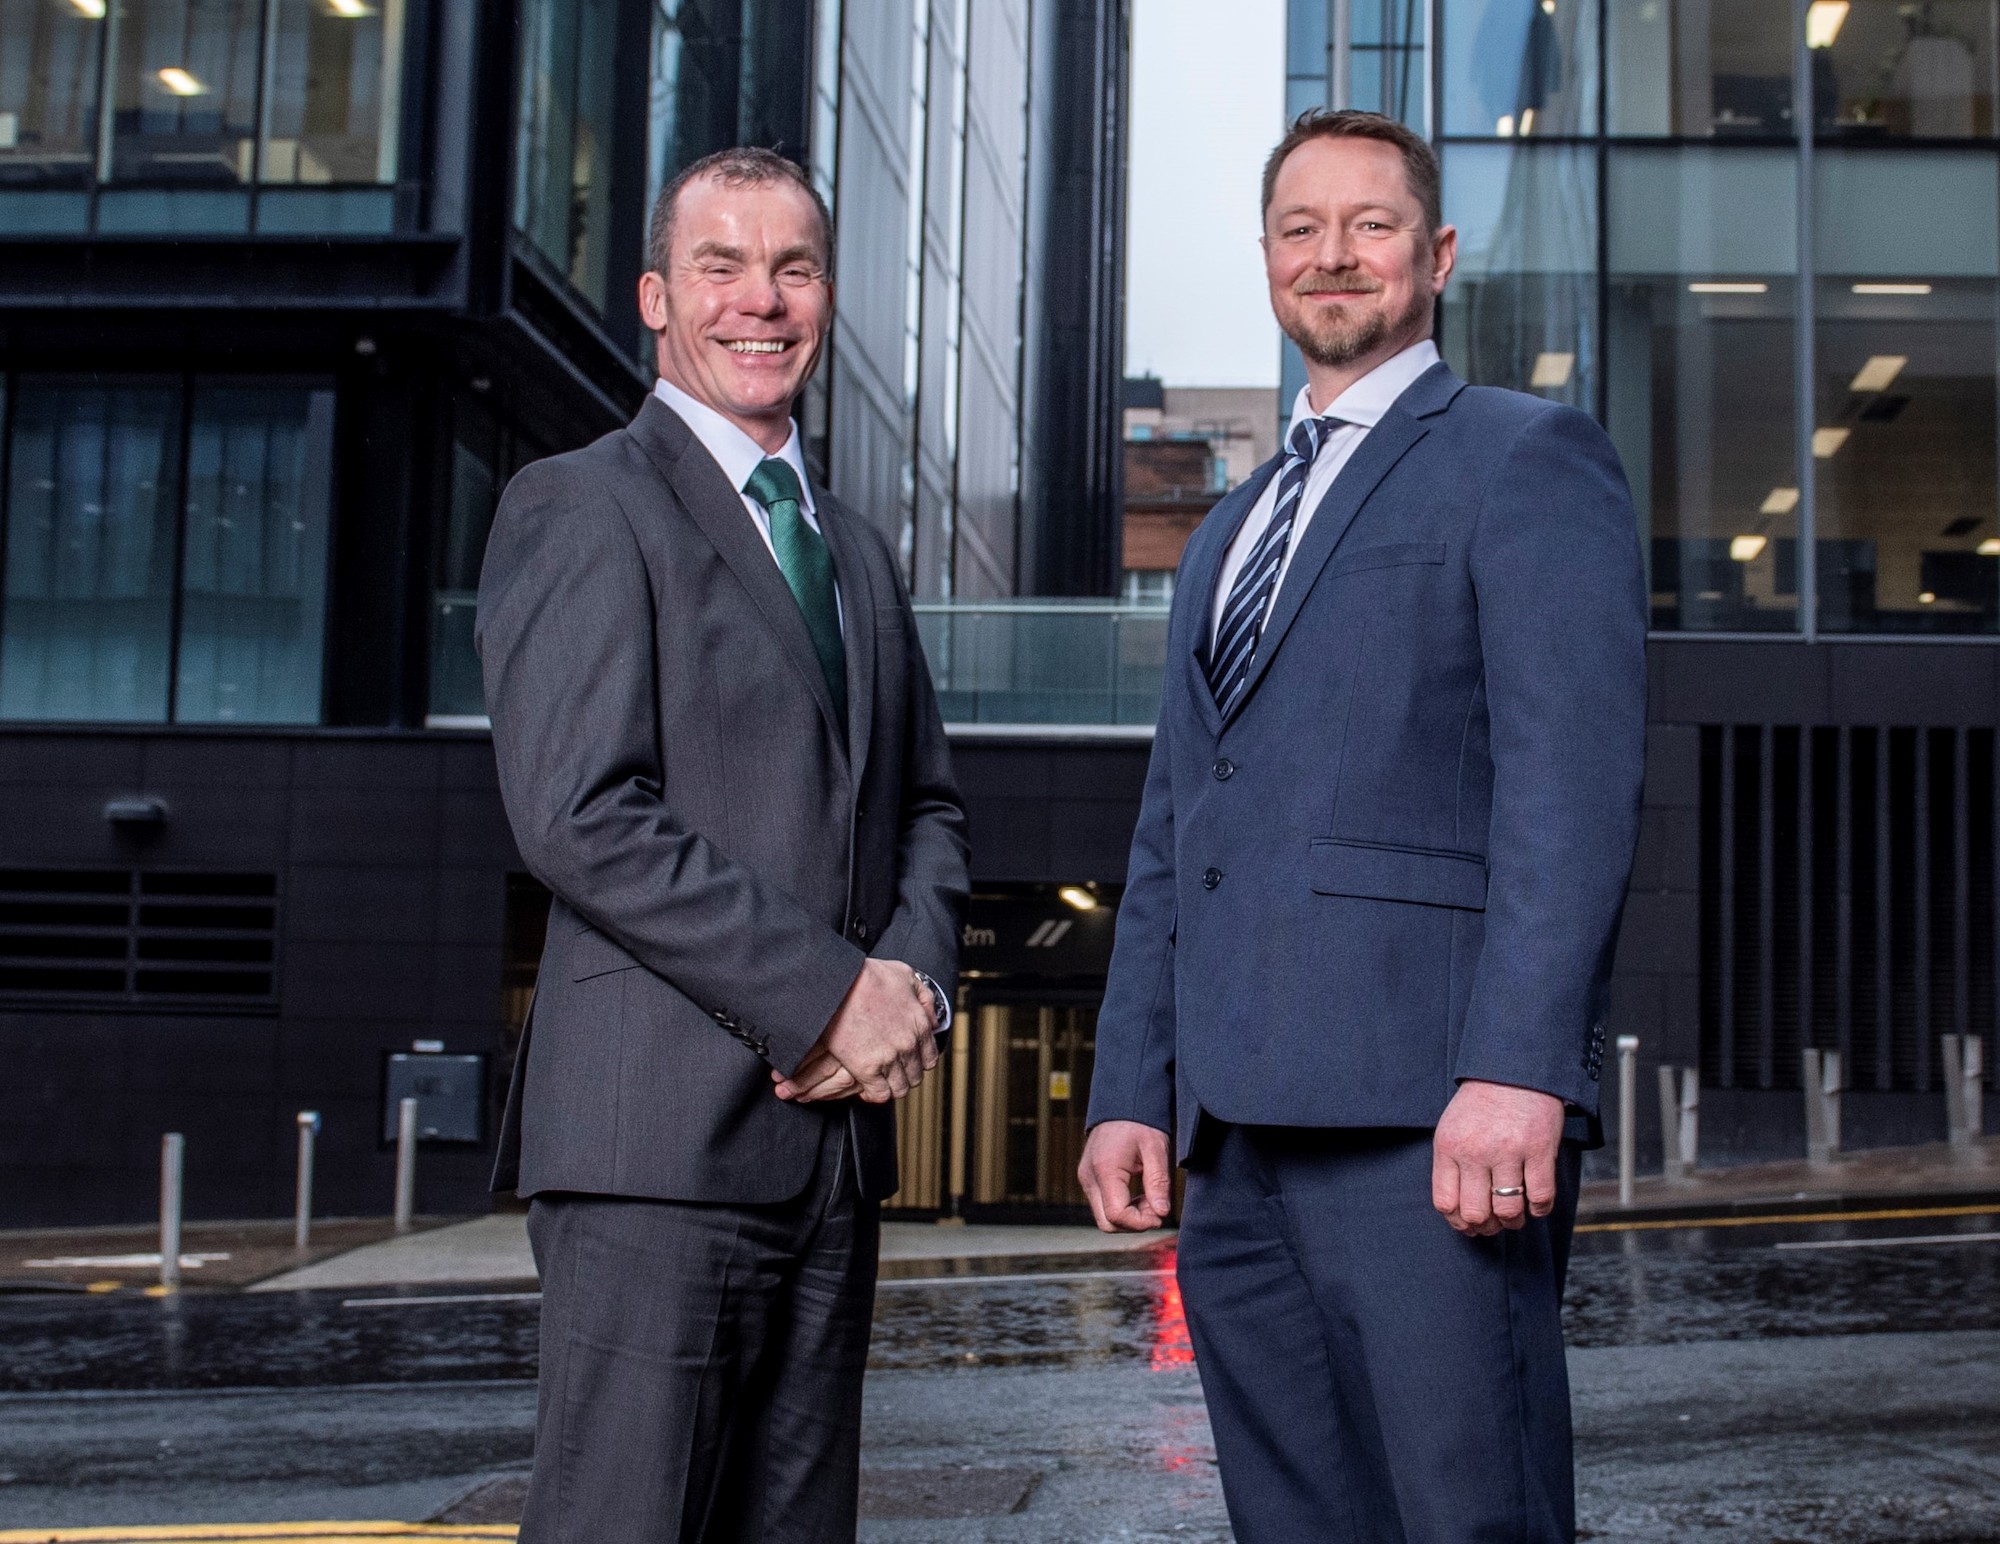 DM Hall appoints two new partners